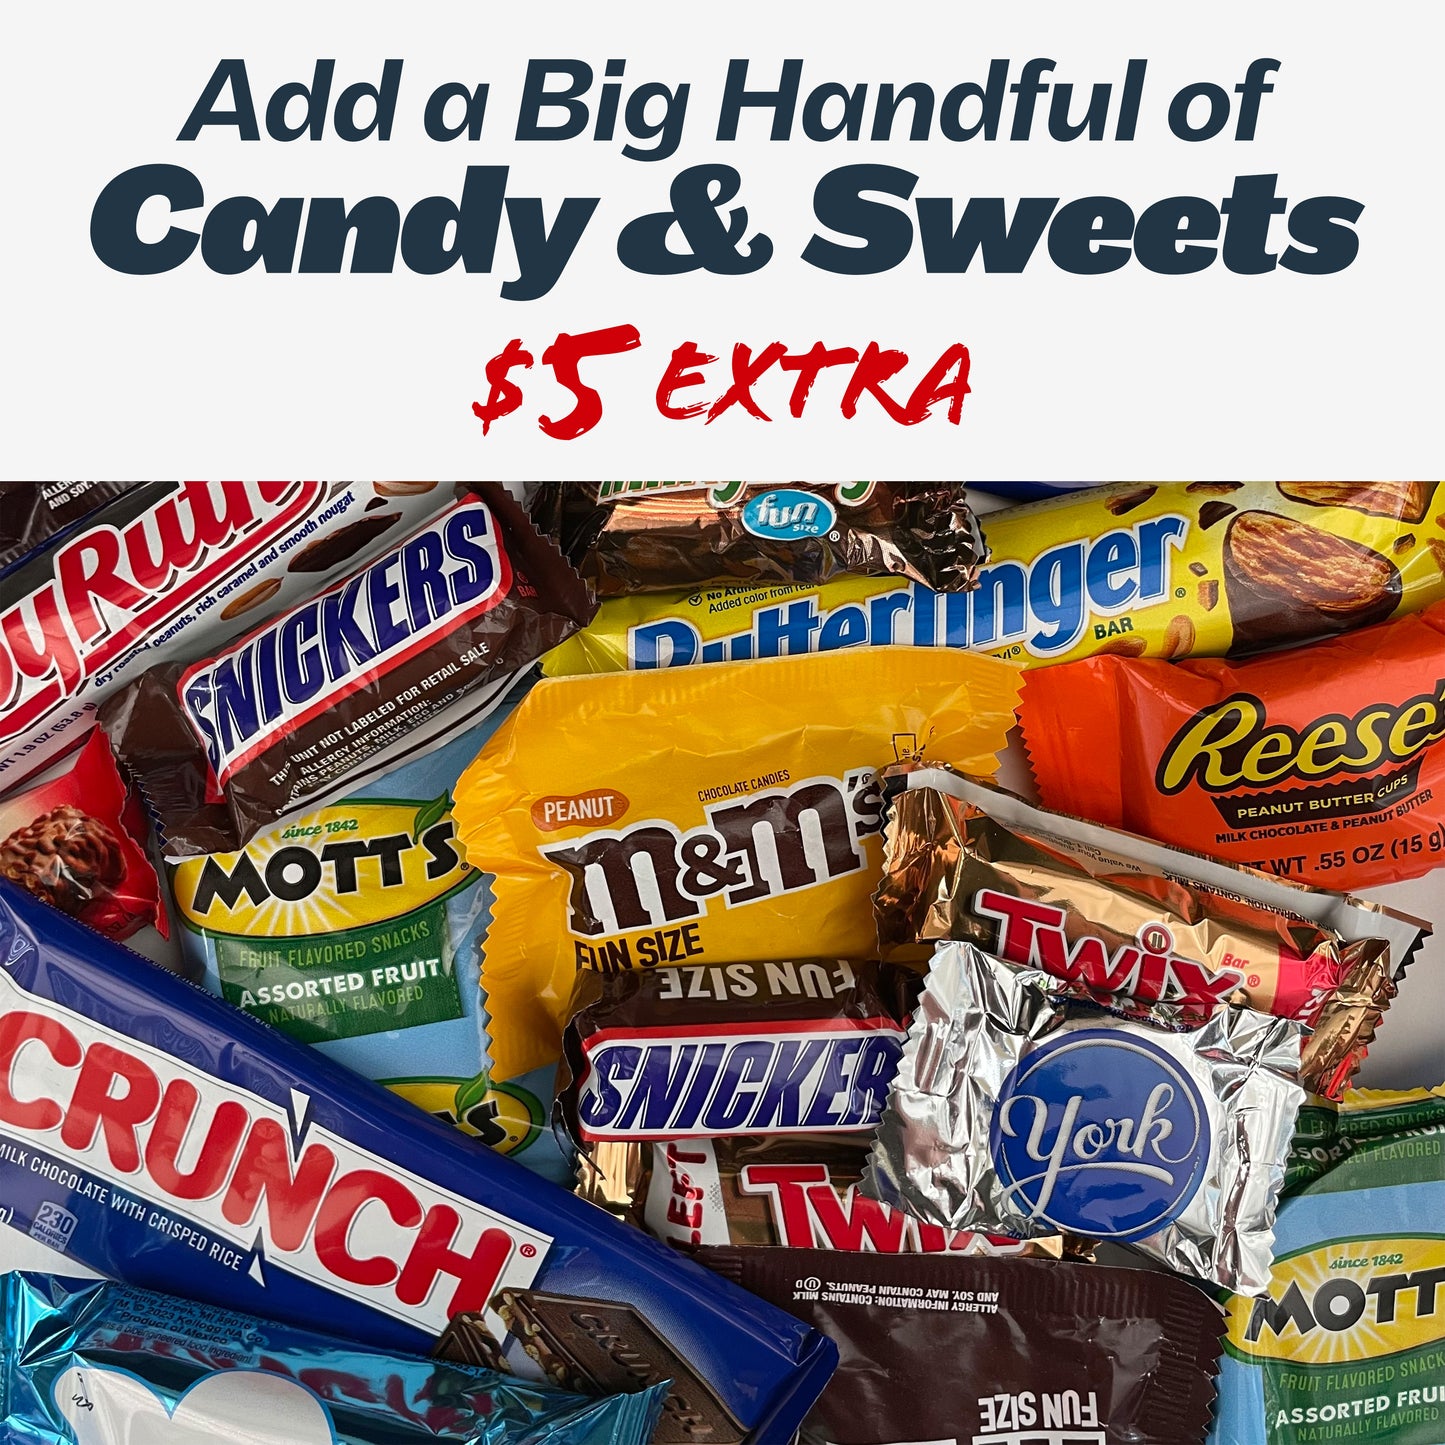 Add a big handful of candy and sweets for $5 extra!